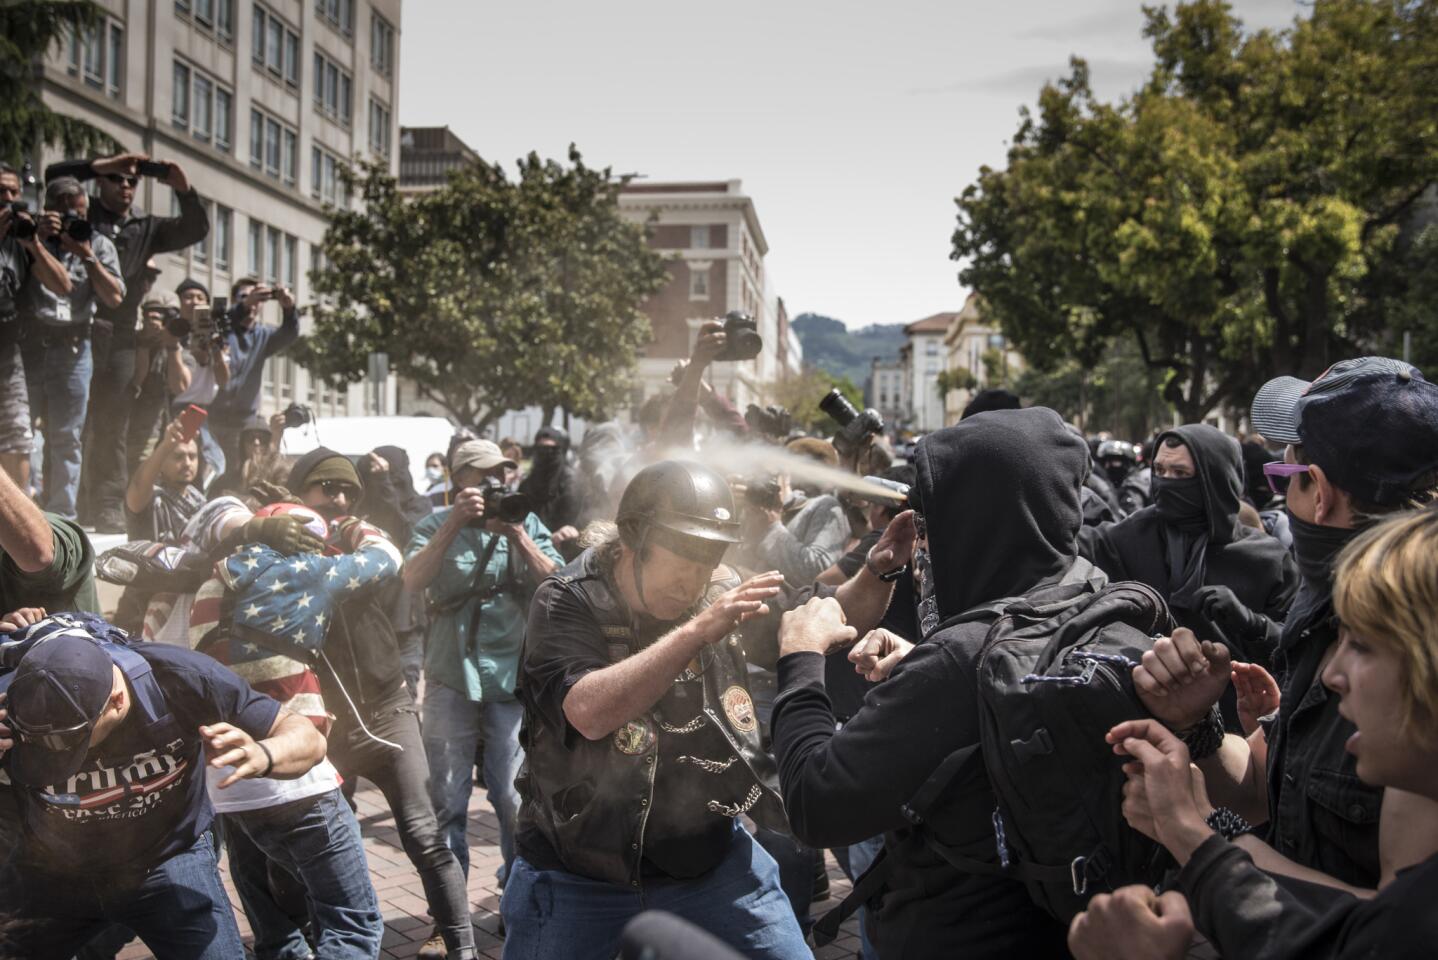 Pepper spray is used as supporters of President Trump clash with protesters Saturday during Berkeley rally organized by the Trump supporters.